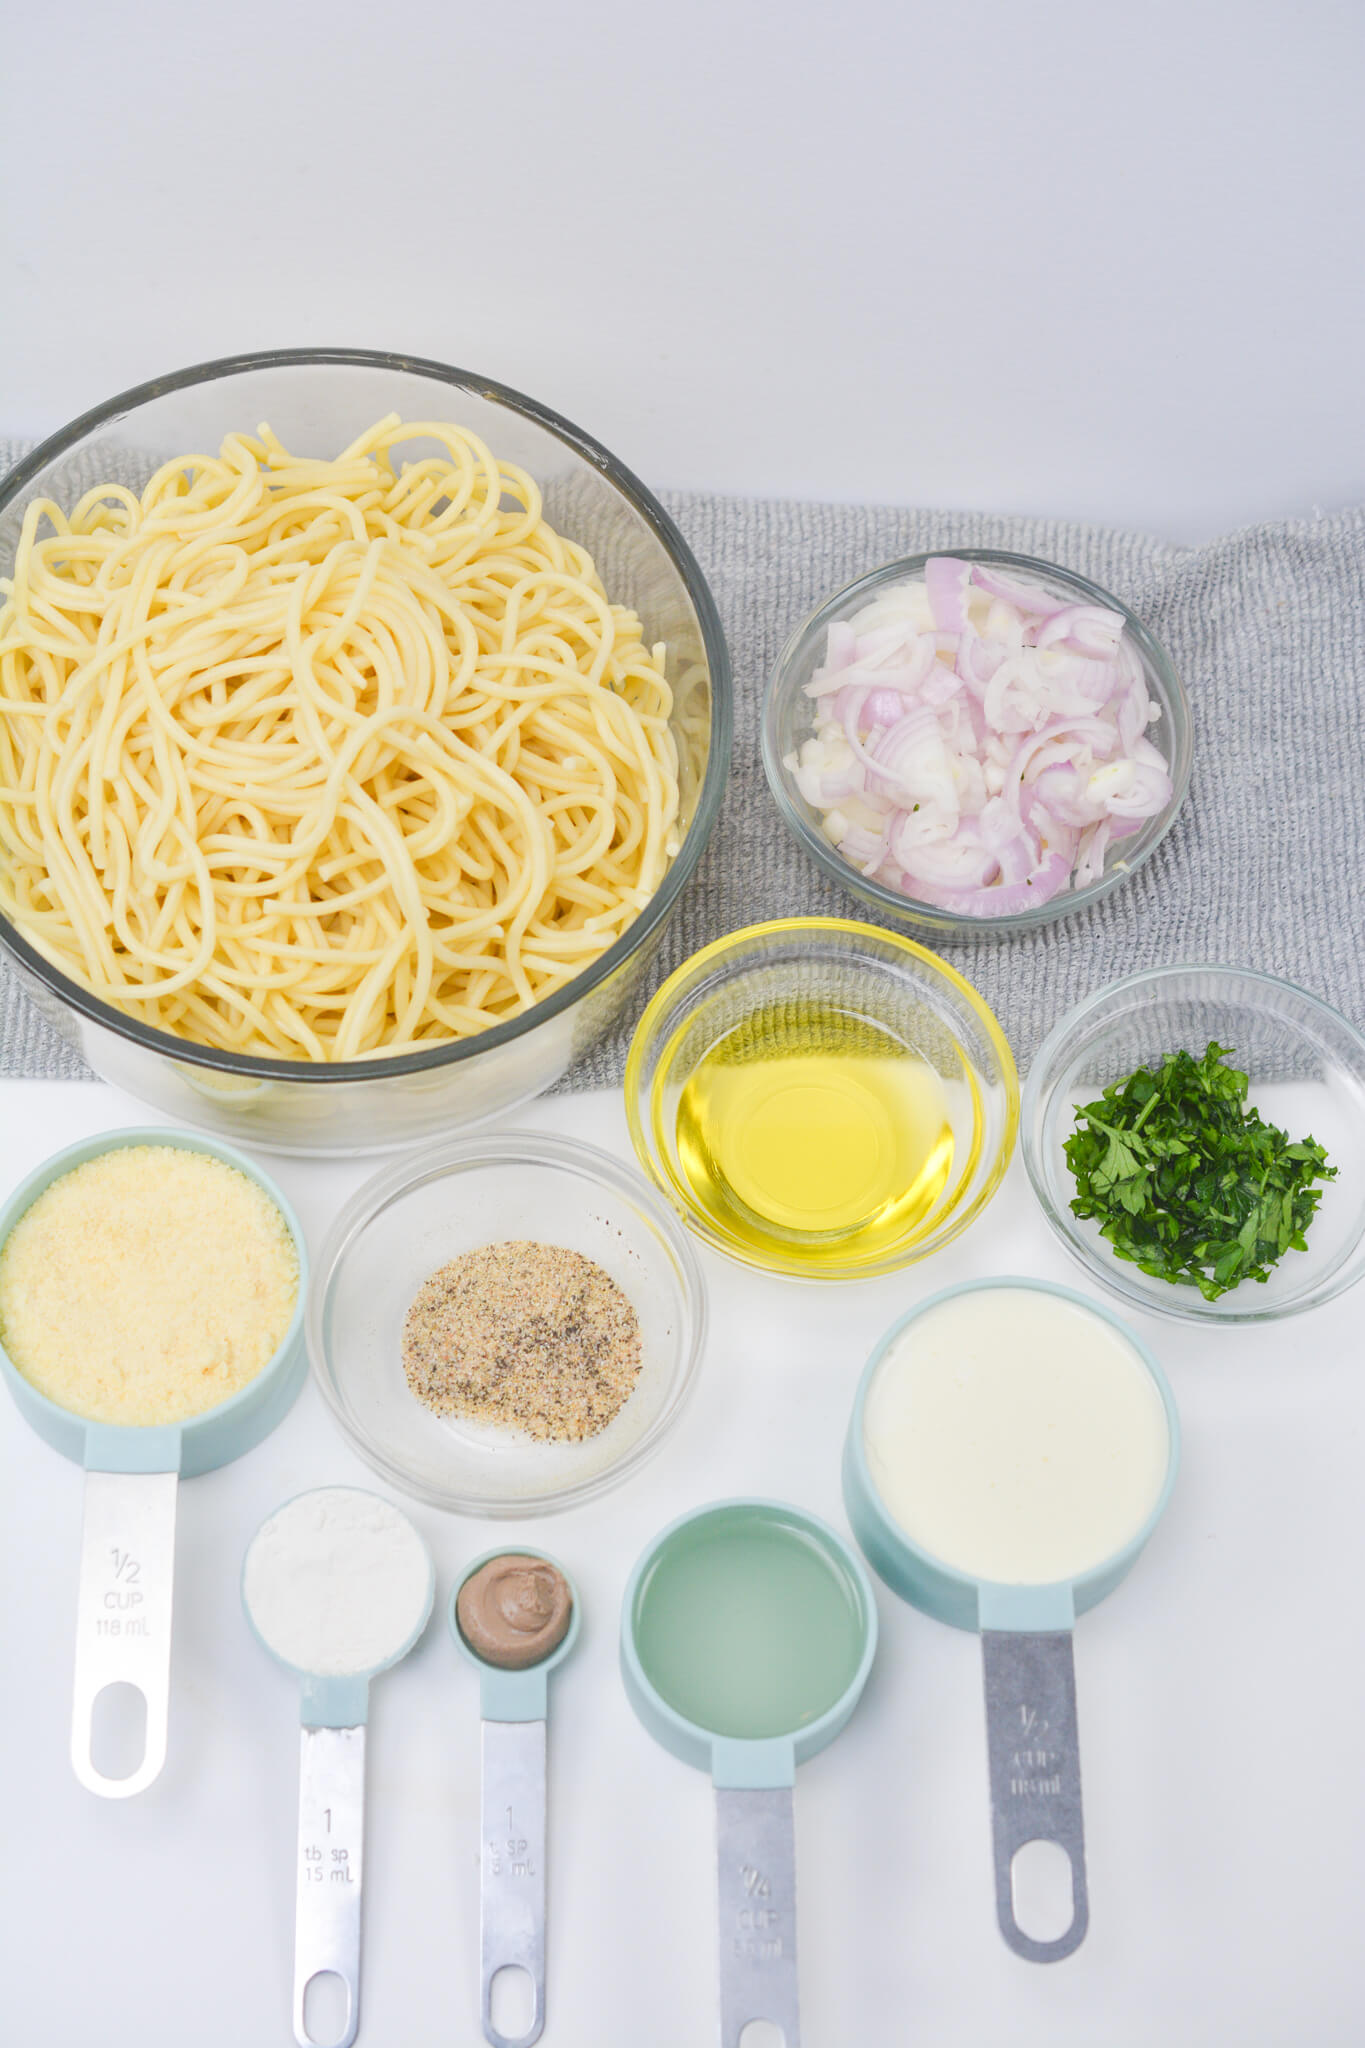 Cooked pasta, vegetables and the ingredients to make the sauce.